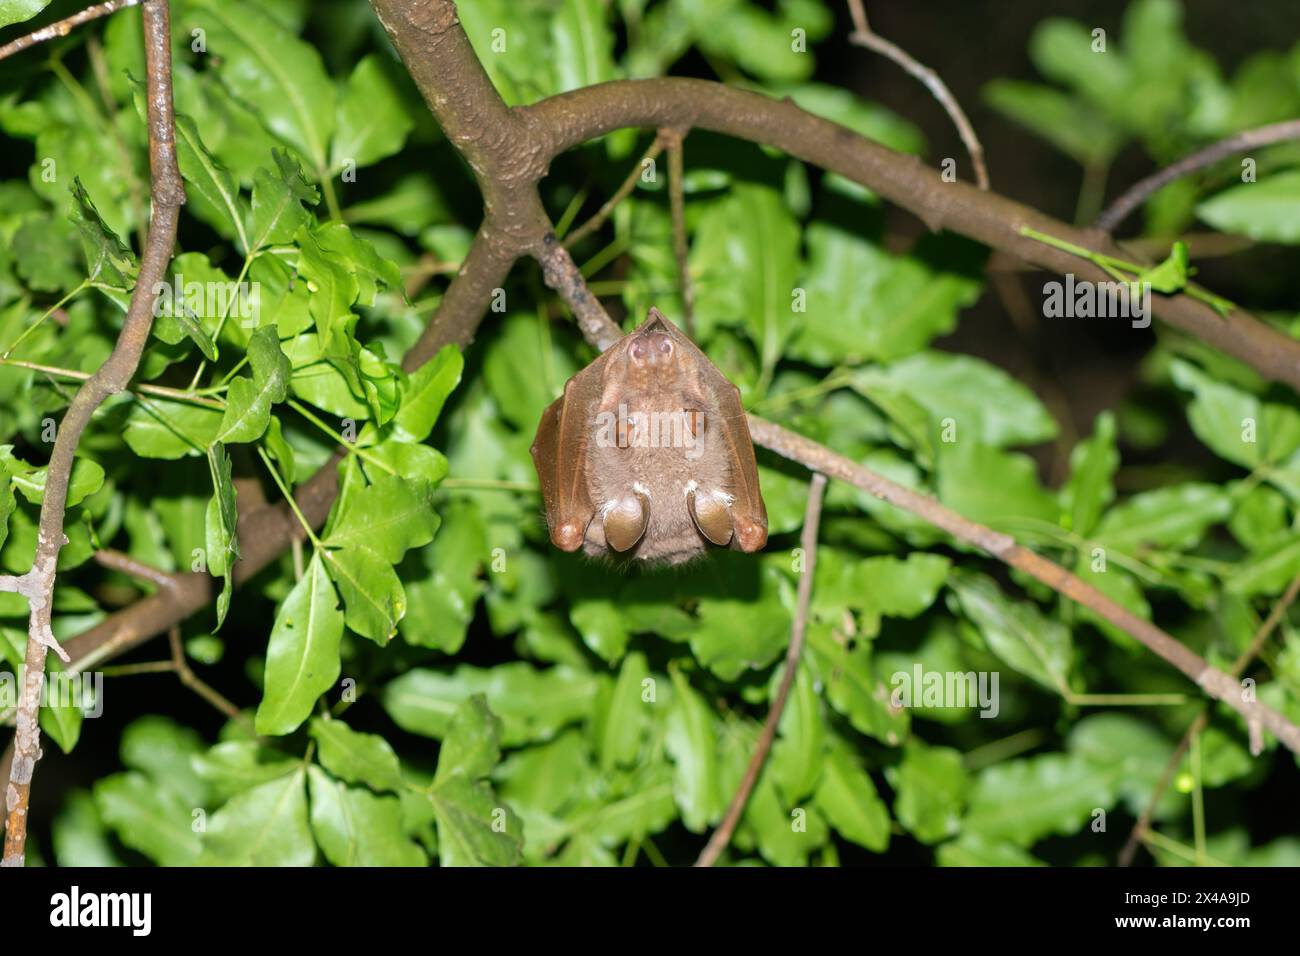 An adorable Wahlberg's epauletted fruit bat (Epomophorus wahlbergi) hanging from a branch in a tree Stock Photo